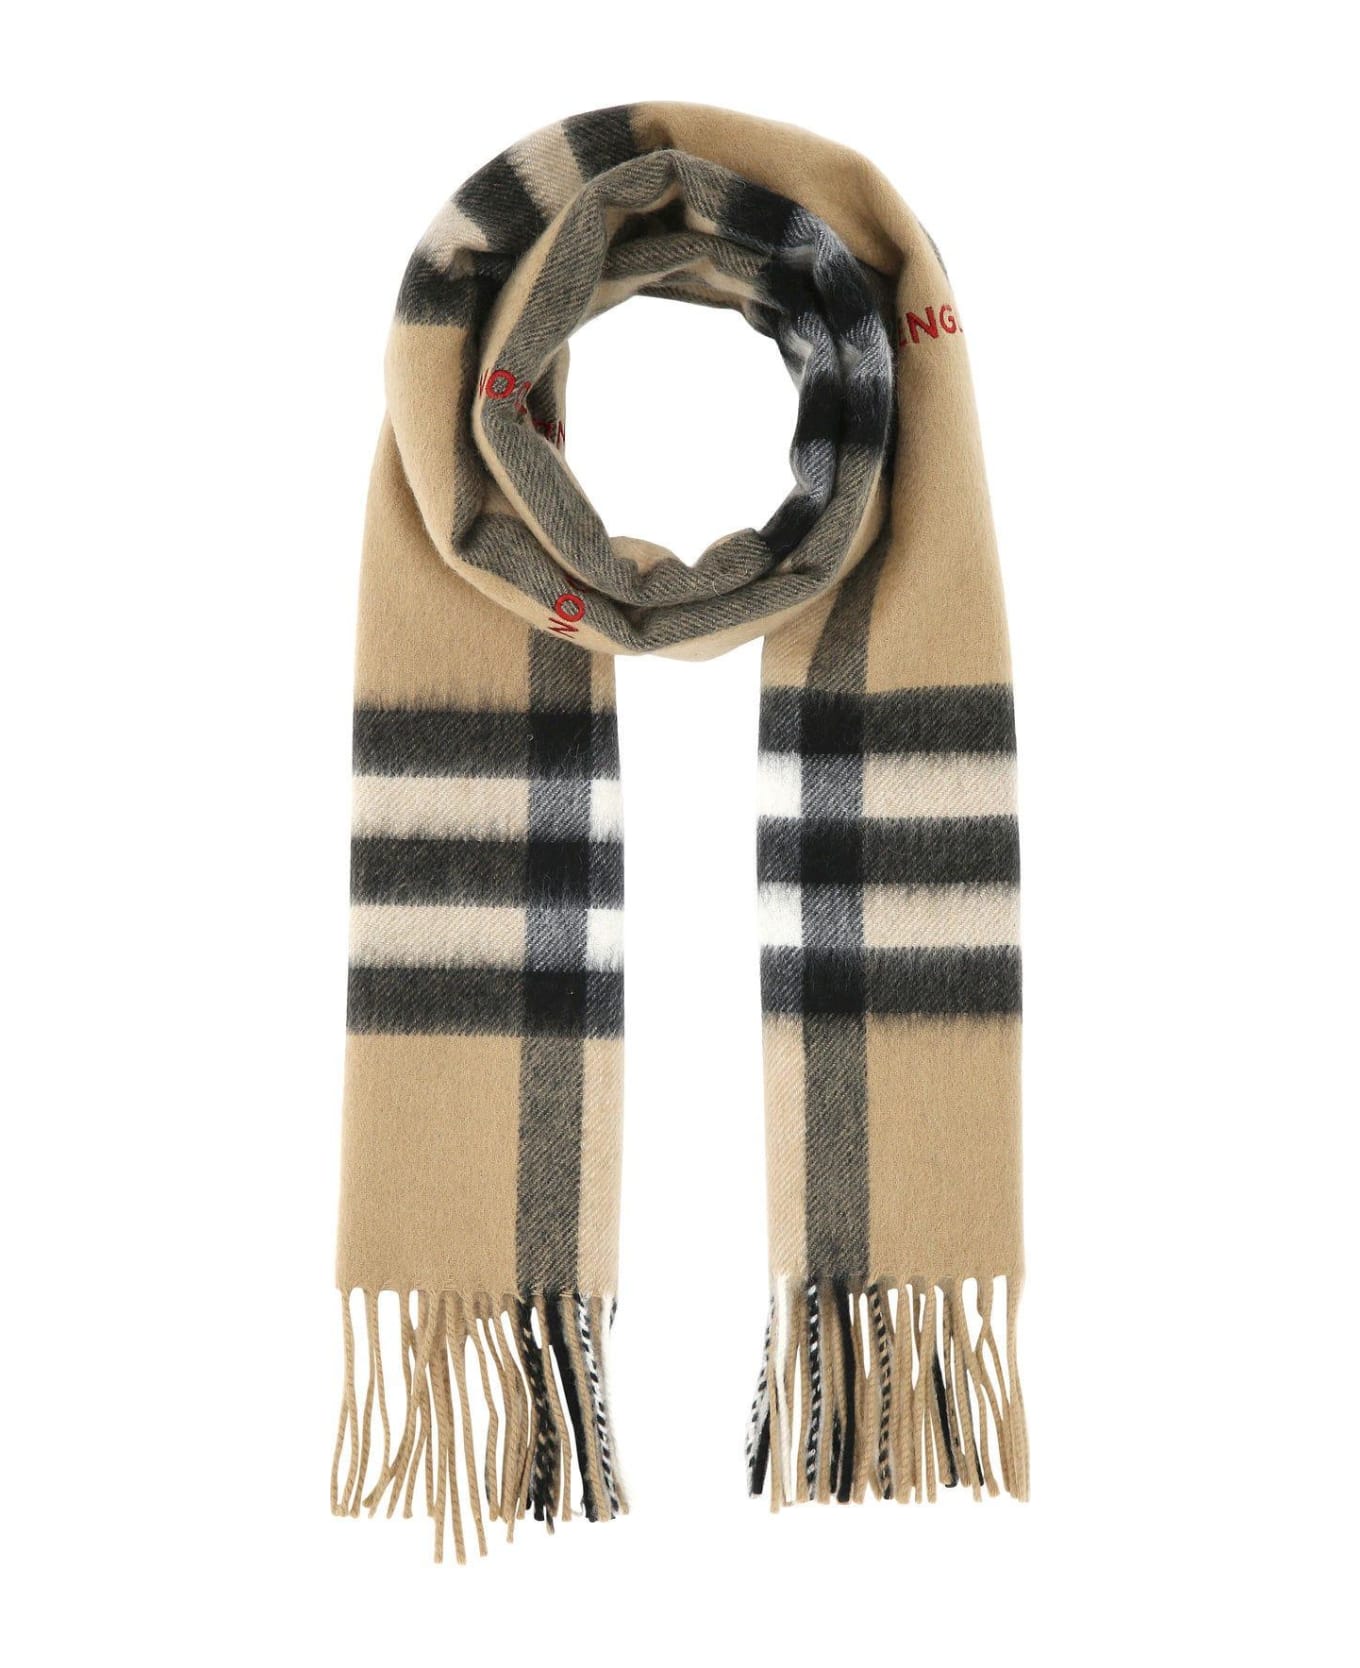 Burberry Printed Cashmere Scarf - BEIGE